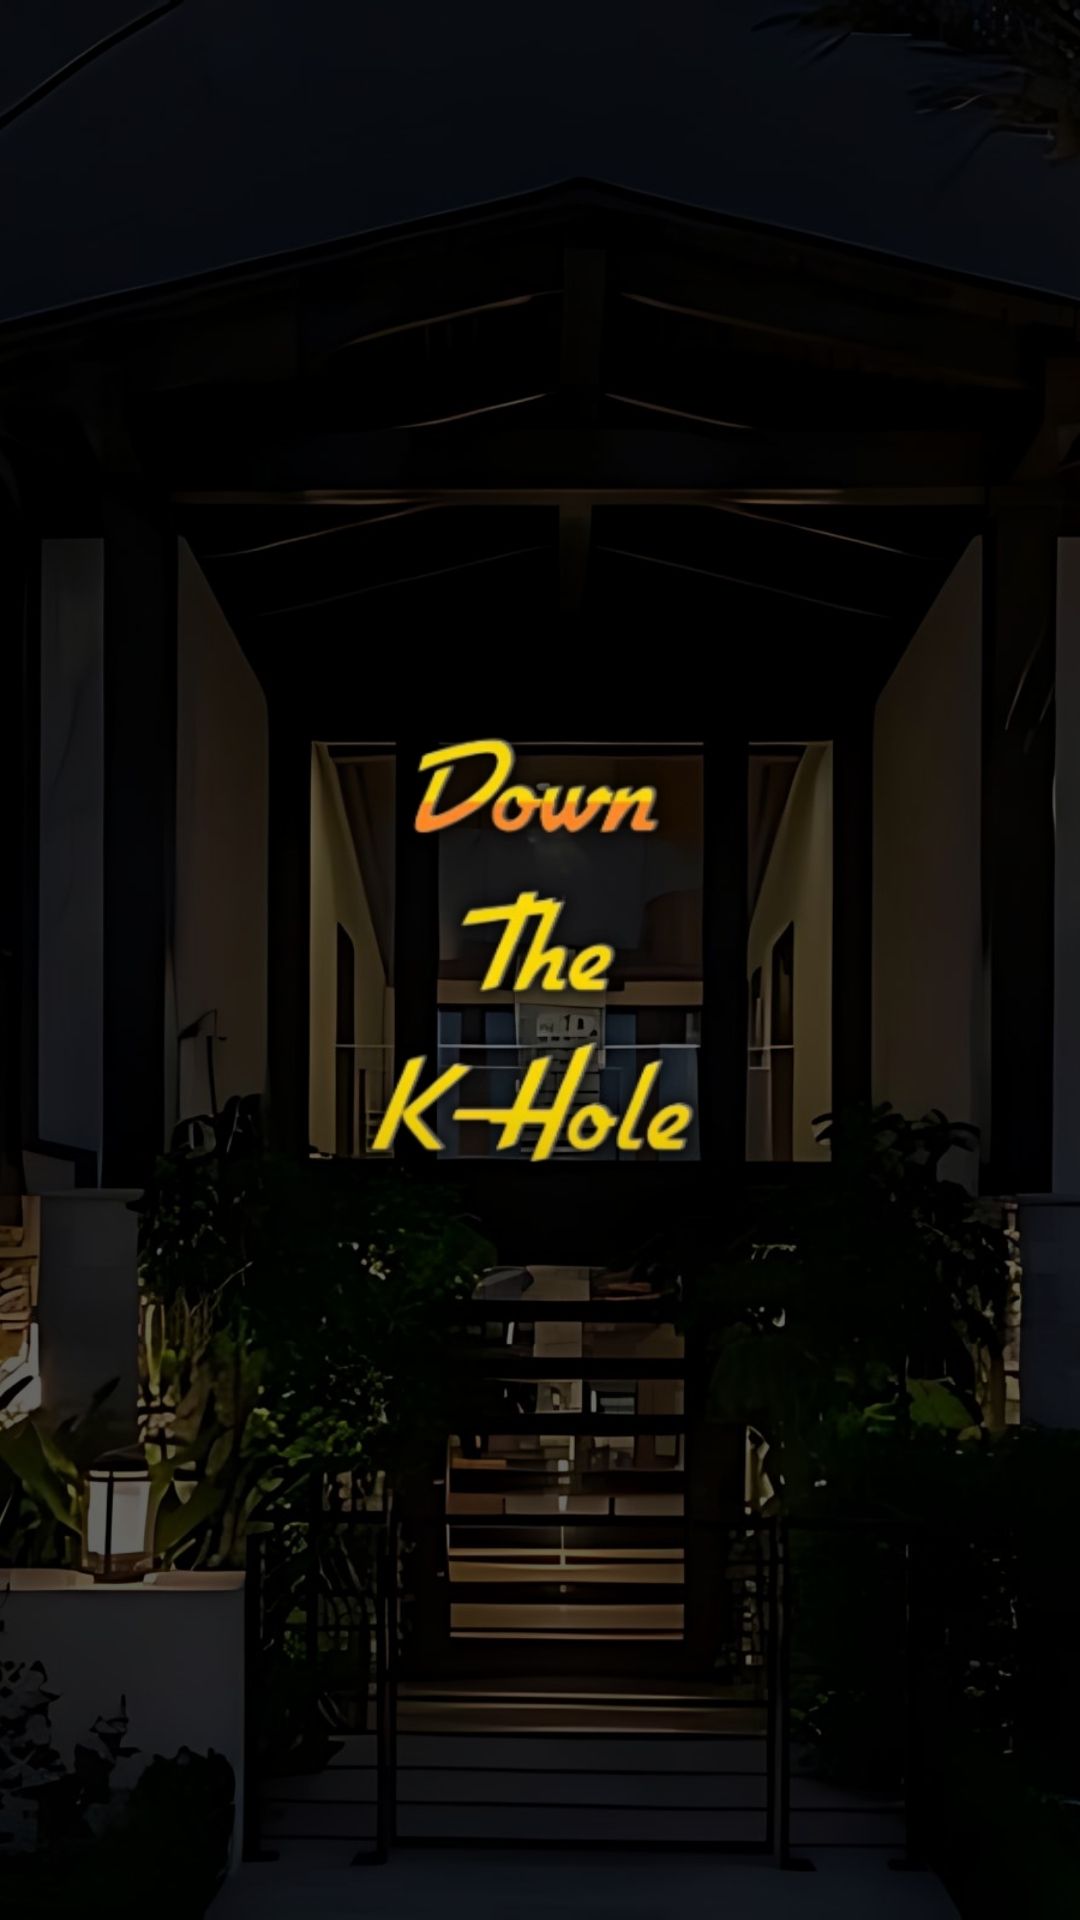 Down The K-Hole